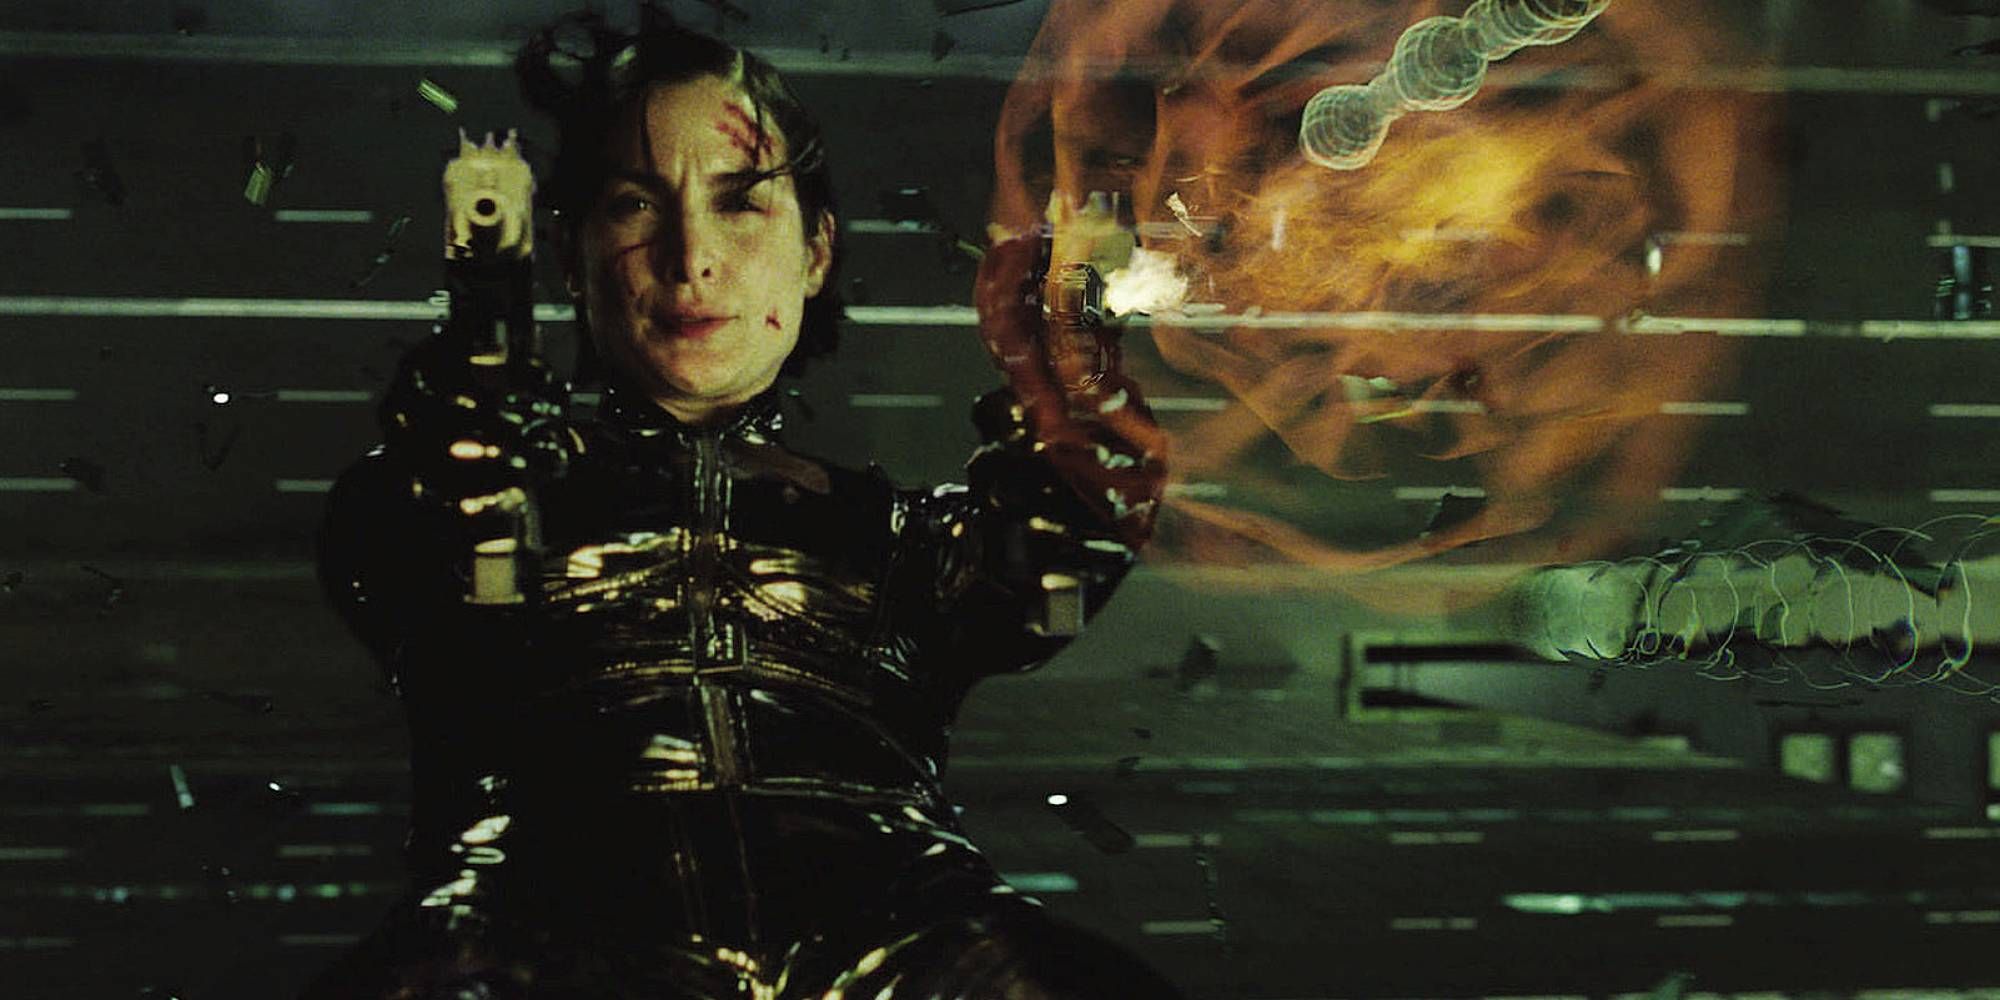 Carrie-Anne Moss in The Matrix Reloaded as Trinity shooting a gun